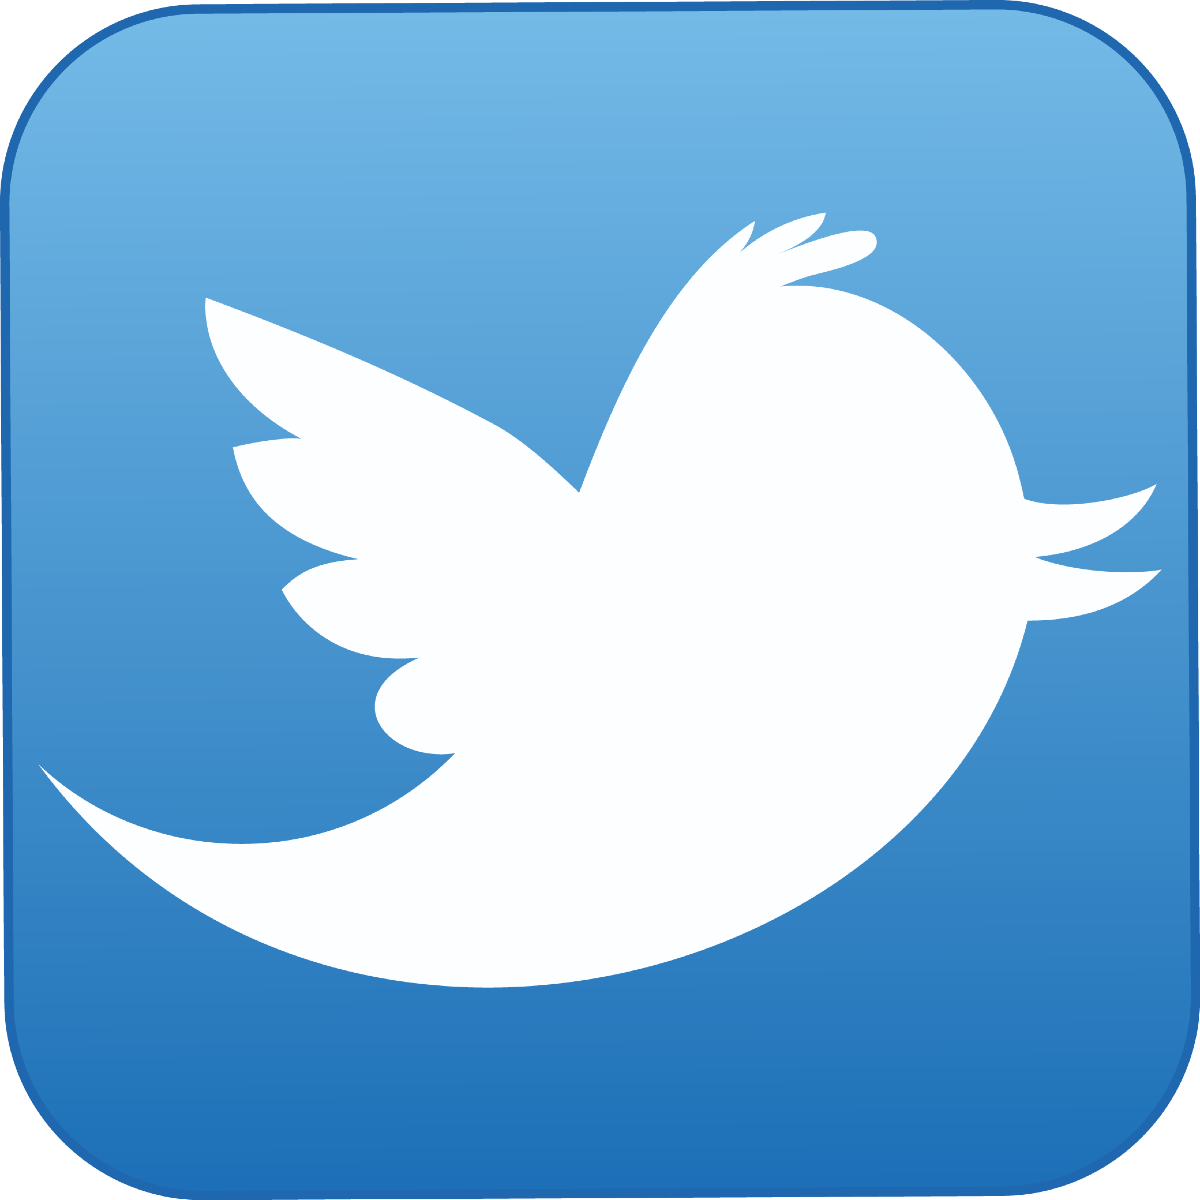 Twitter_logo_png-4.png